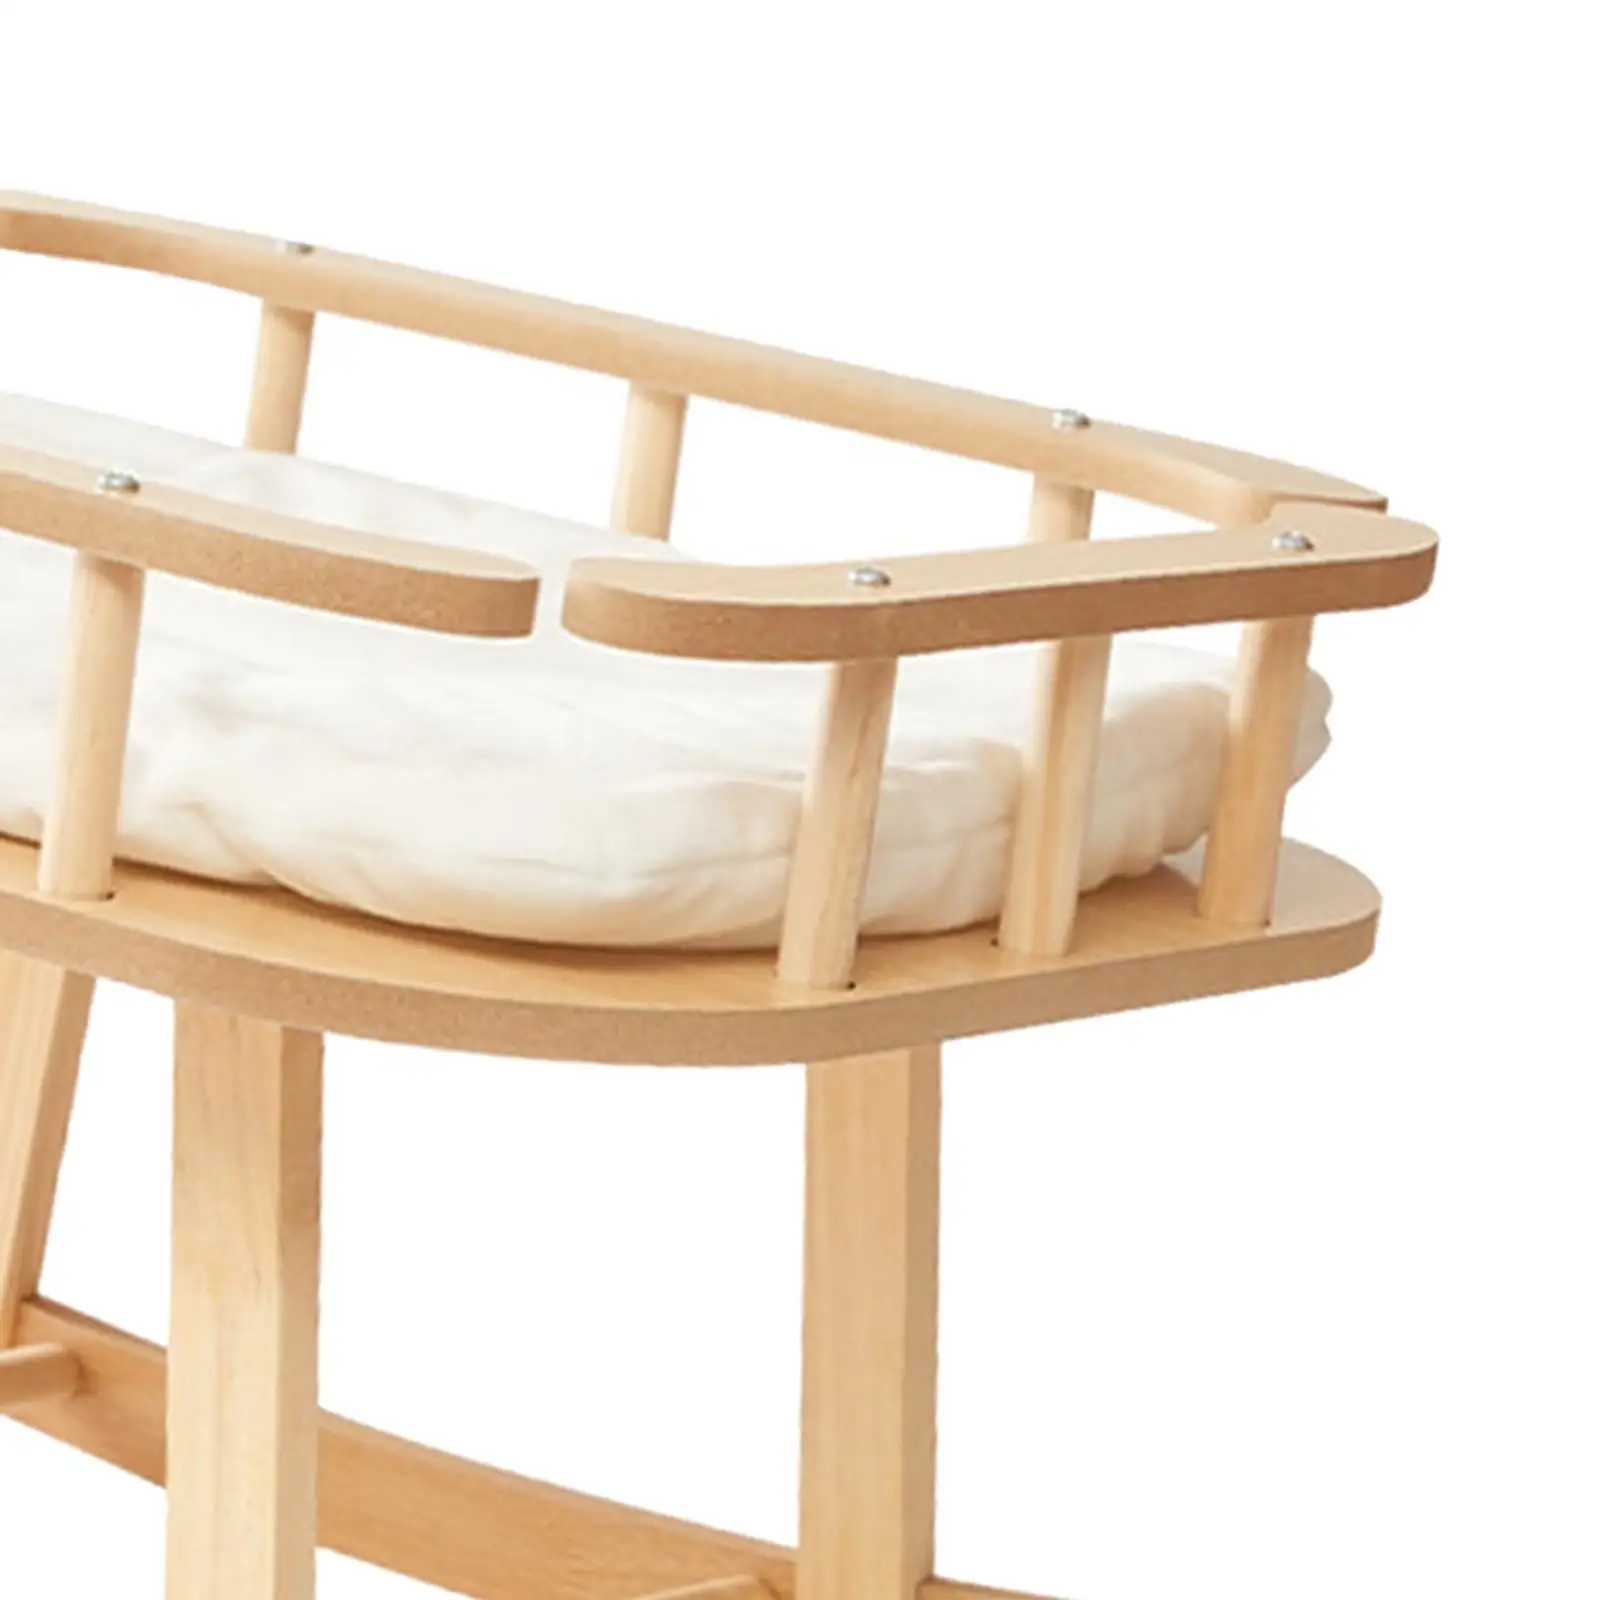 Wooden Frame Cat Hammock Cat Sleeping Bed Swing Chair Lounger Elevated Pet Bed